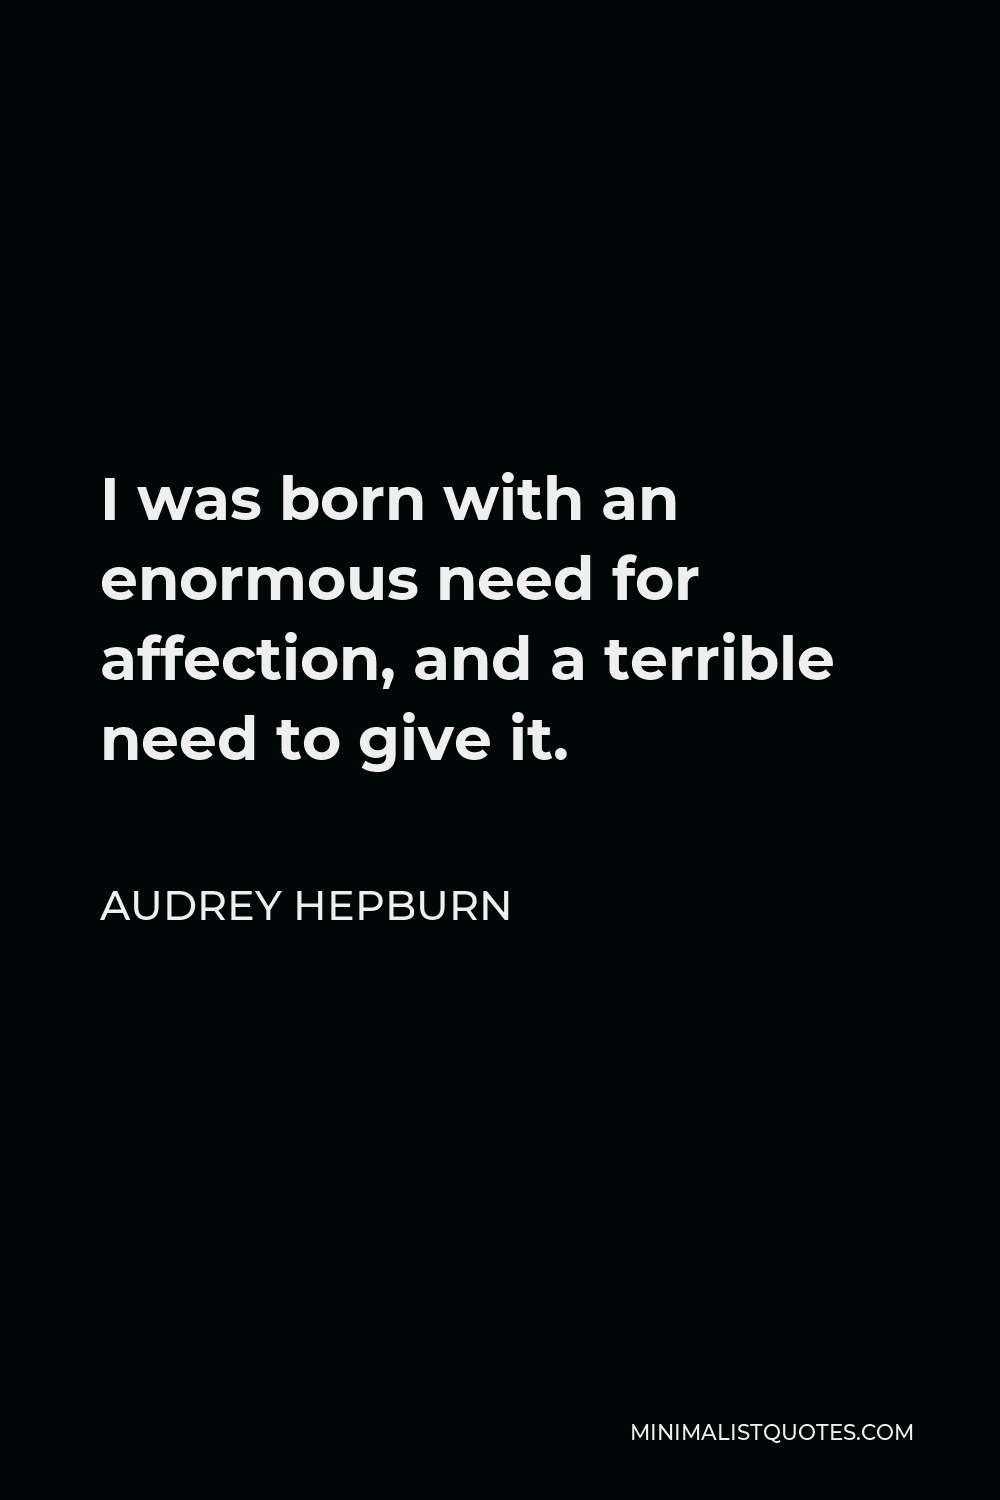 Audrey Hepburn Quote - I was born with an enormous need for affection, and a terrible need to give it.